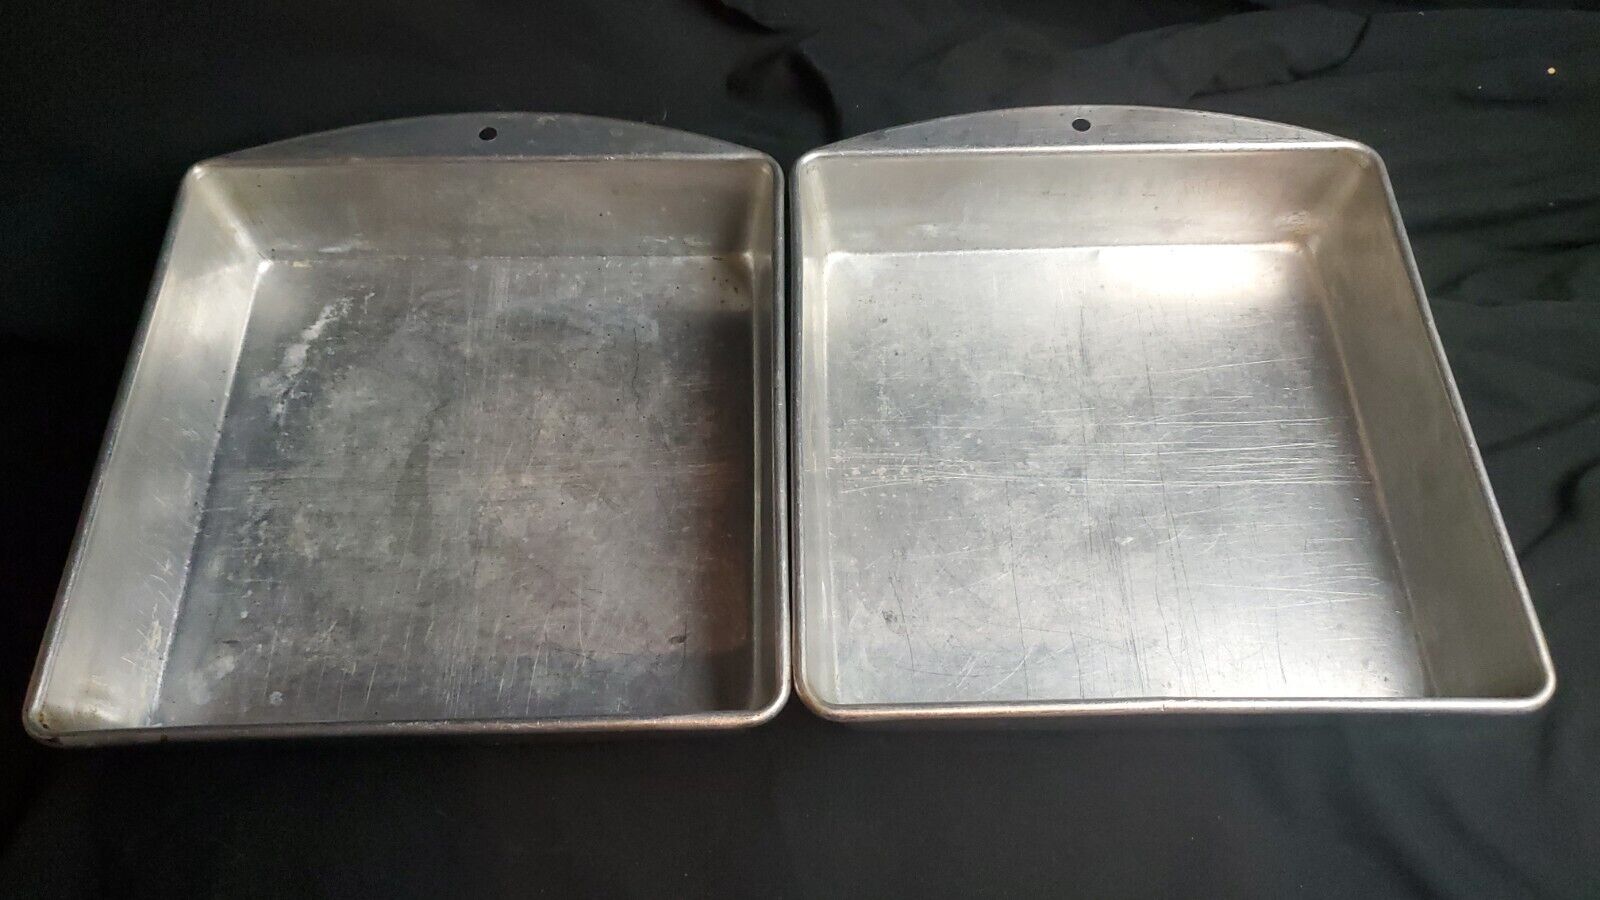 2 Vintage Mirro Aluminum Baking Pans M-5009 9”x 9”x 2” Square Made in the USA